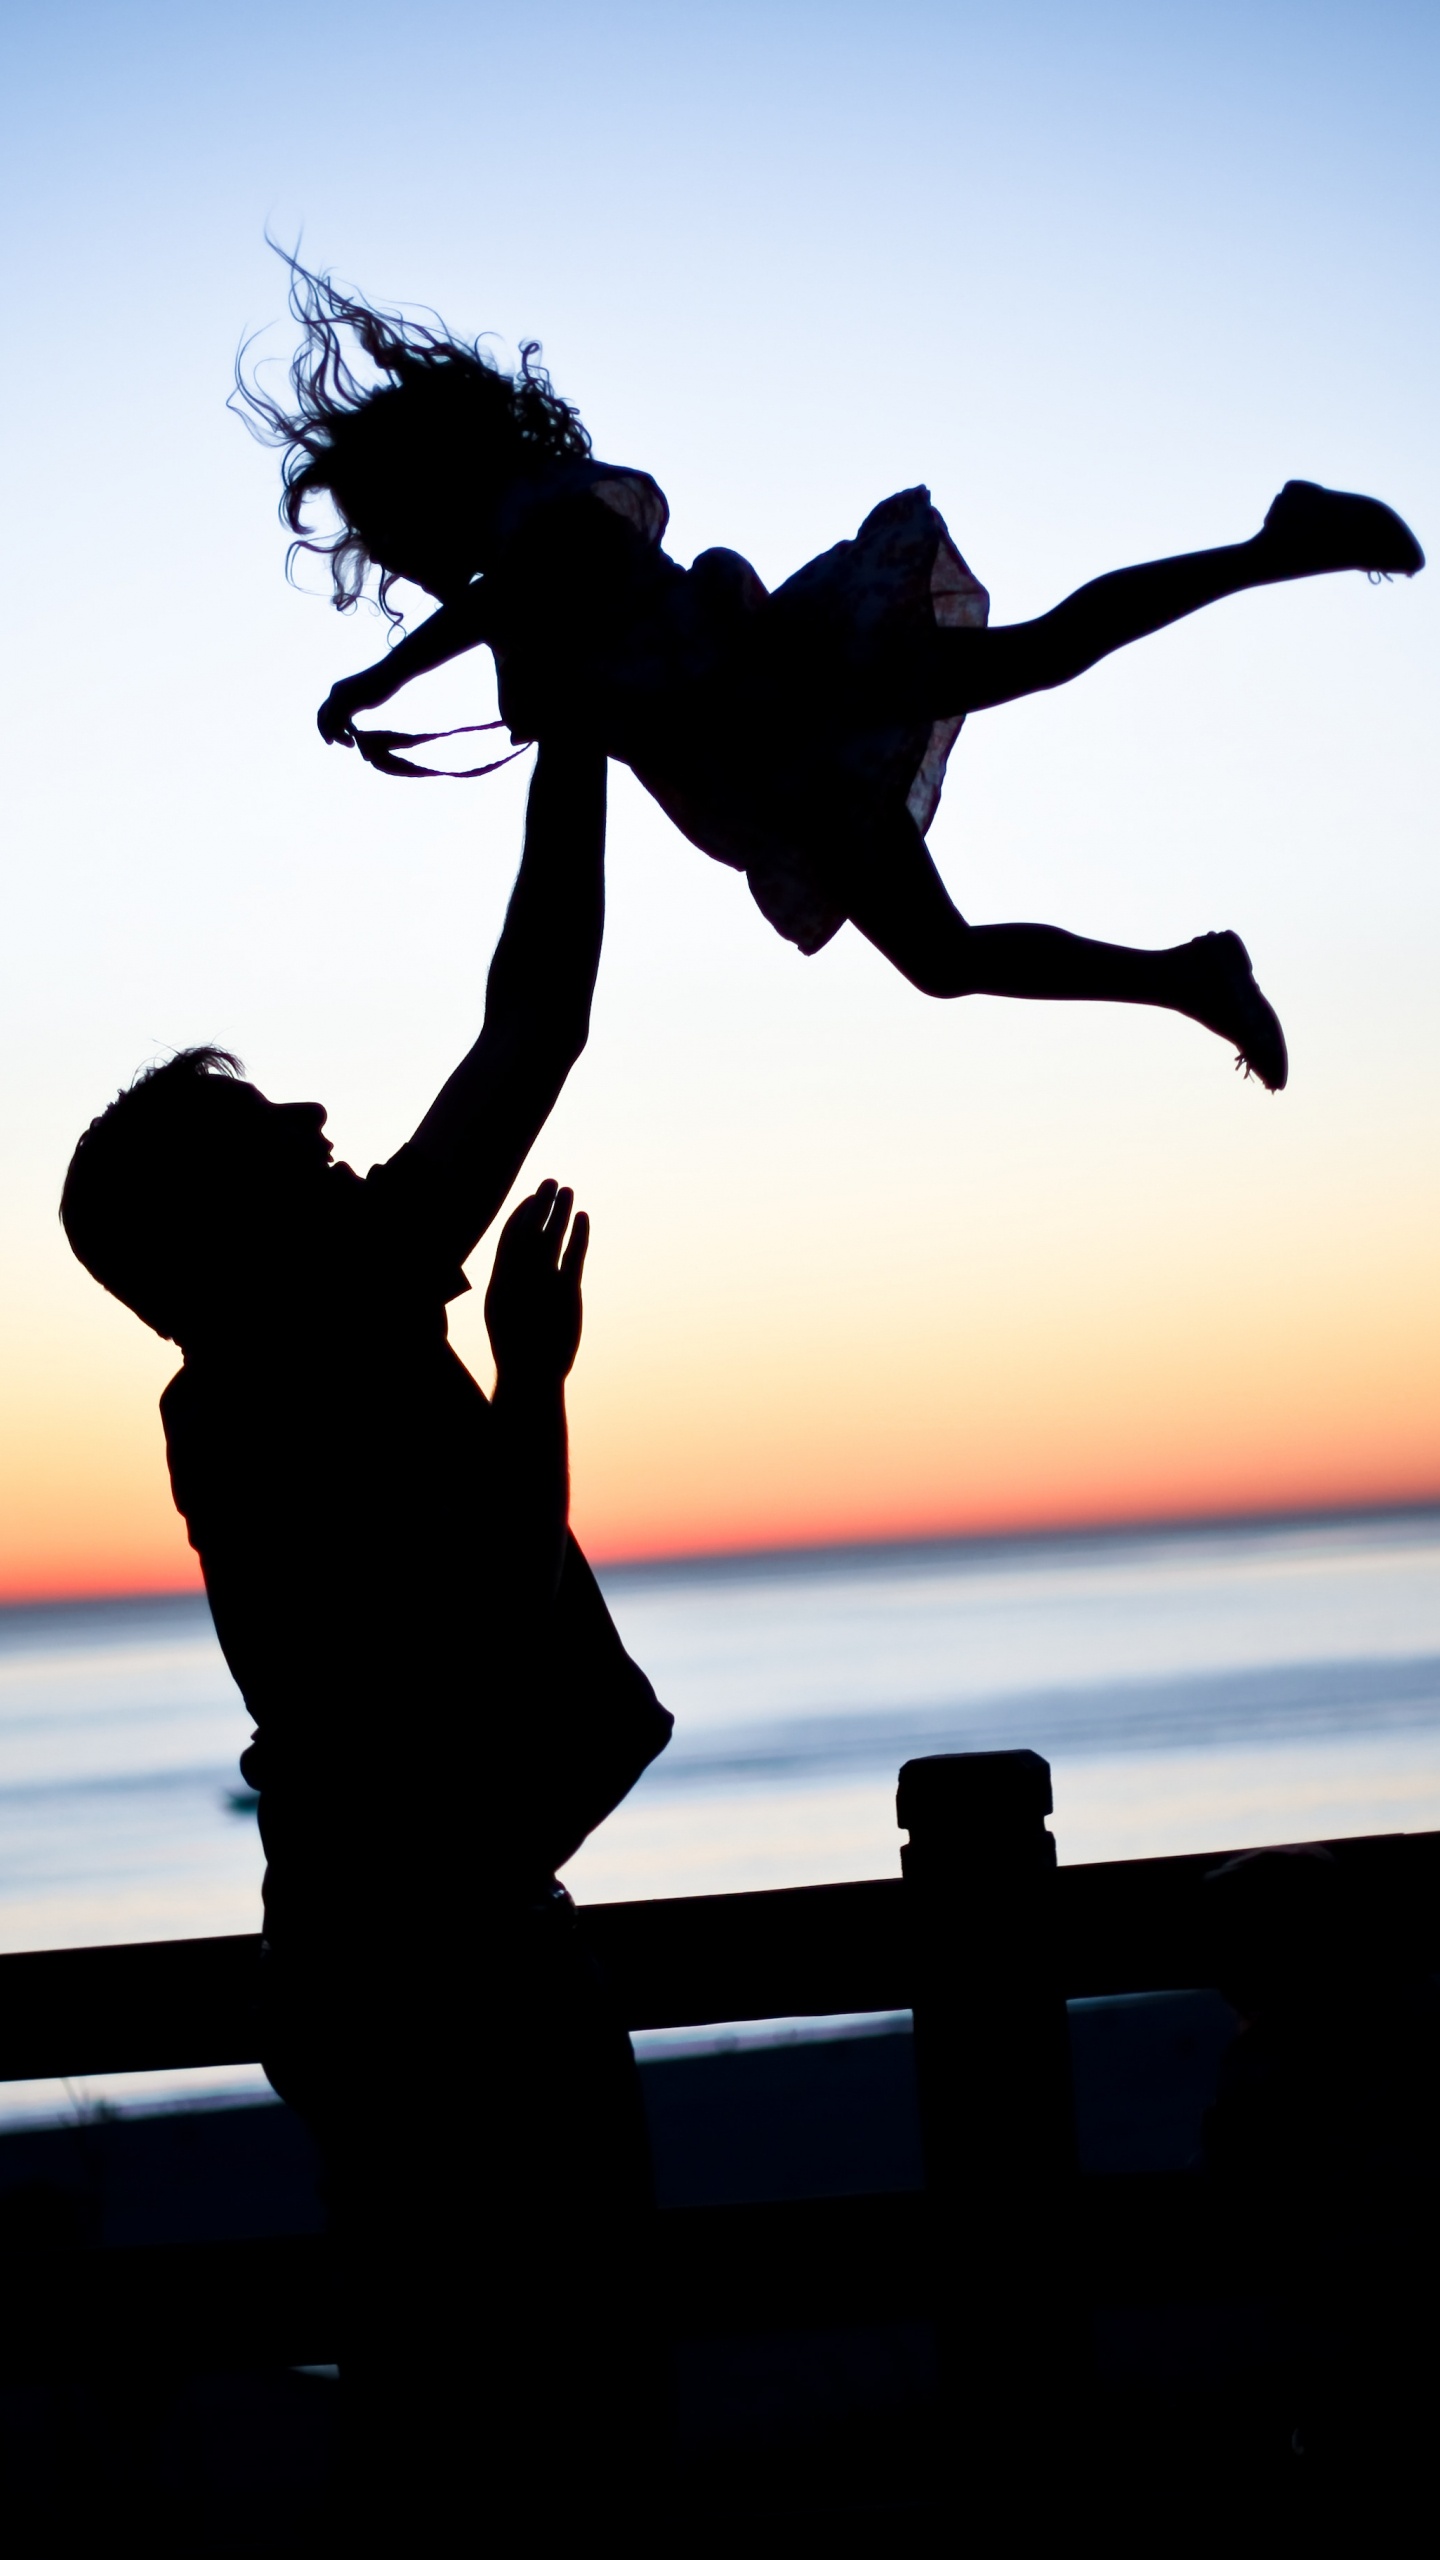 Father, Daughter, Family, People in Nature, Jumping. Wallpaper in 1440x2560 Resolution